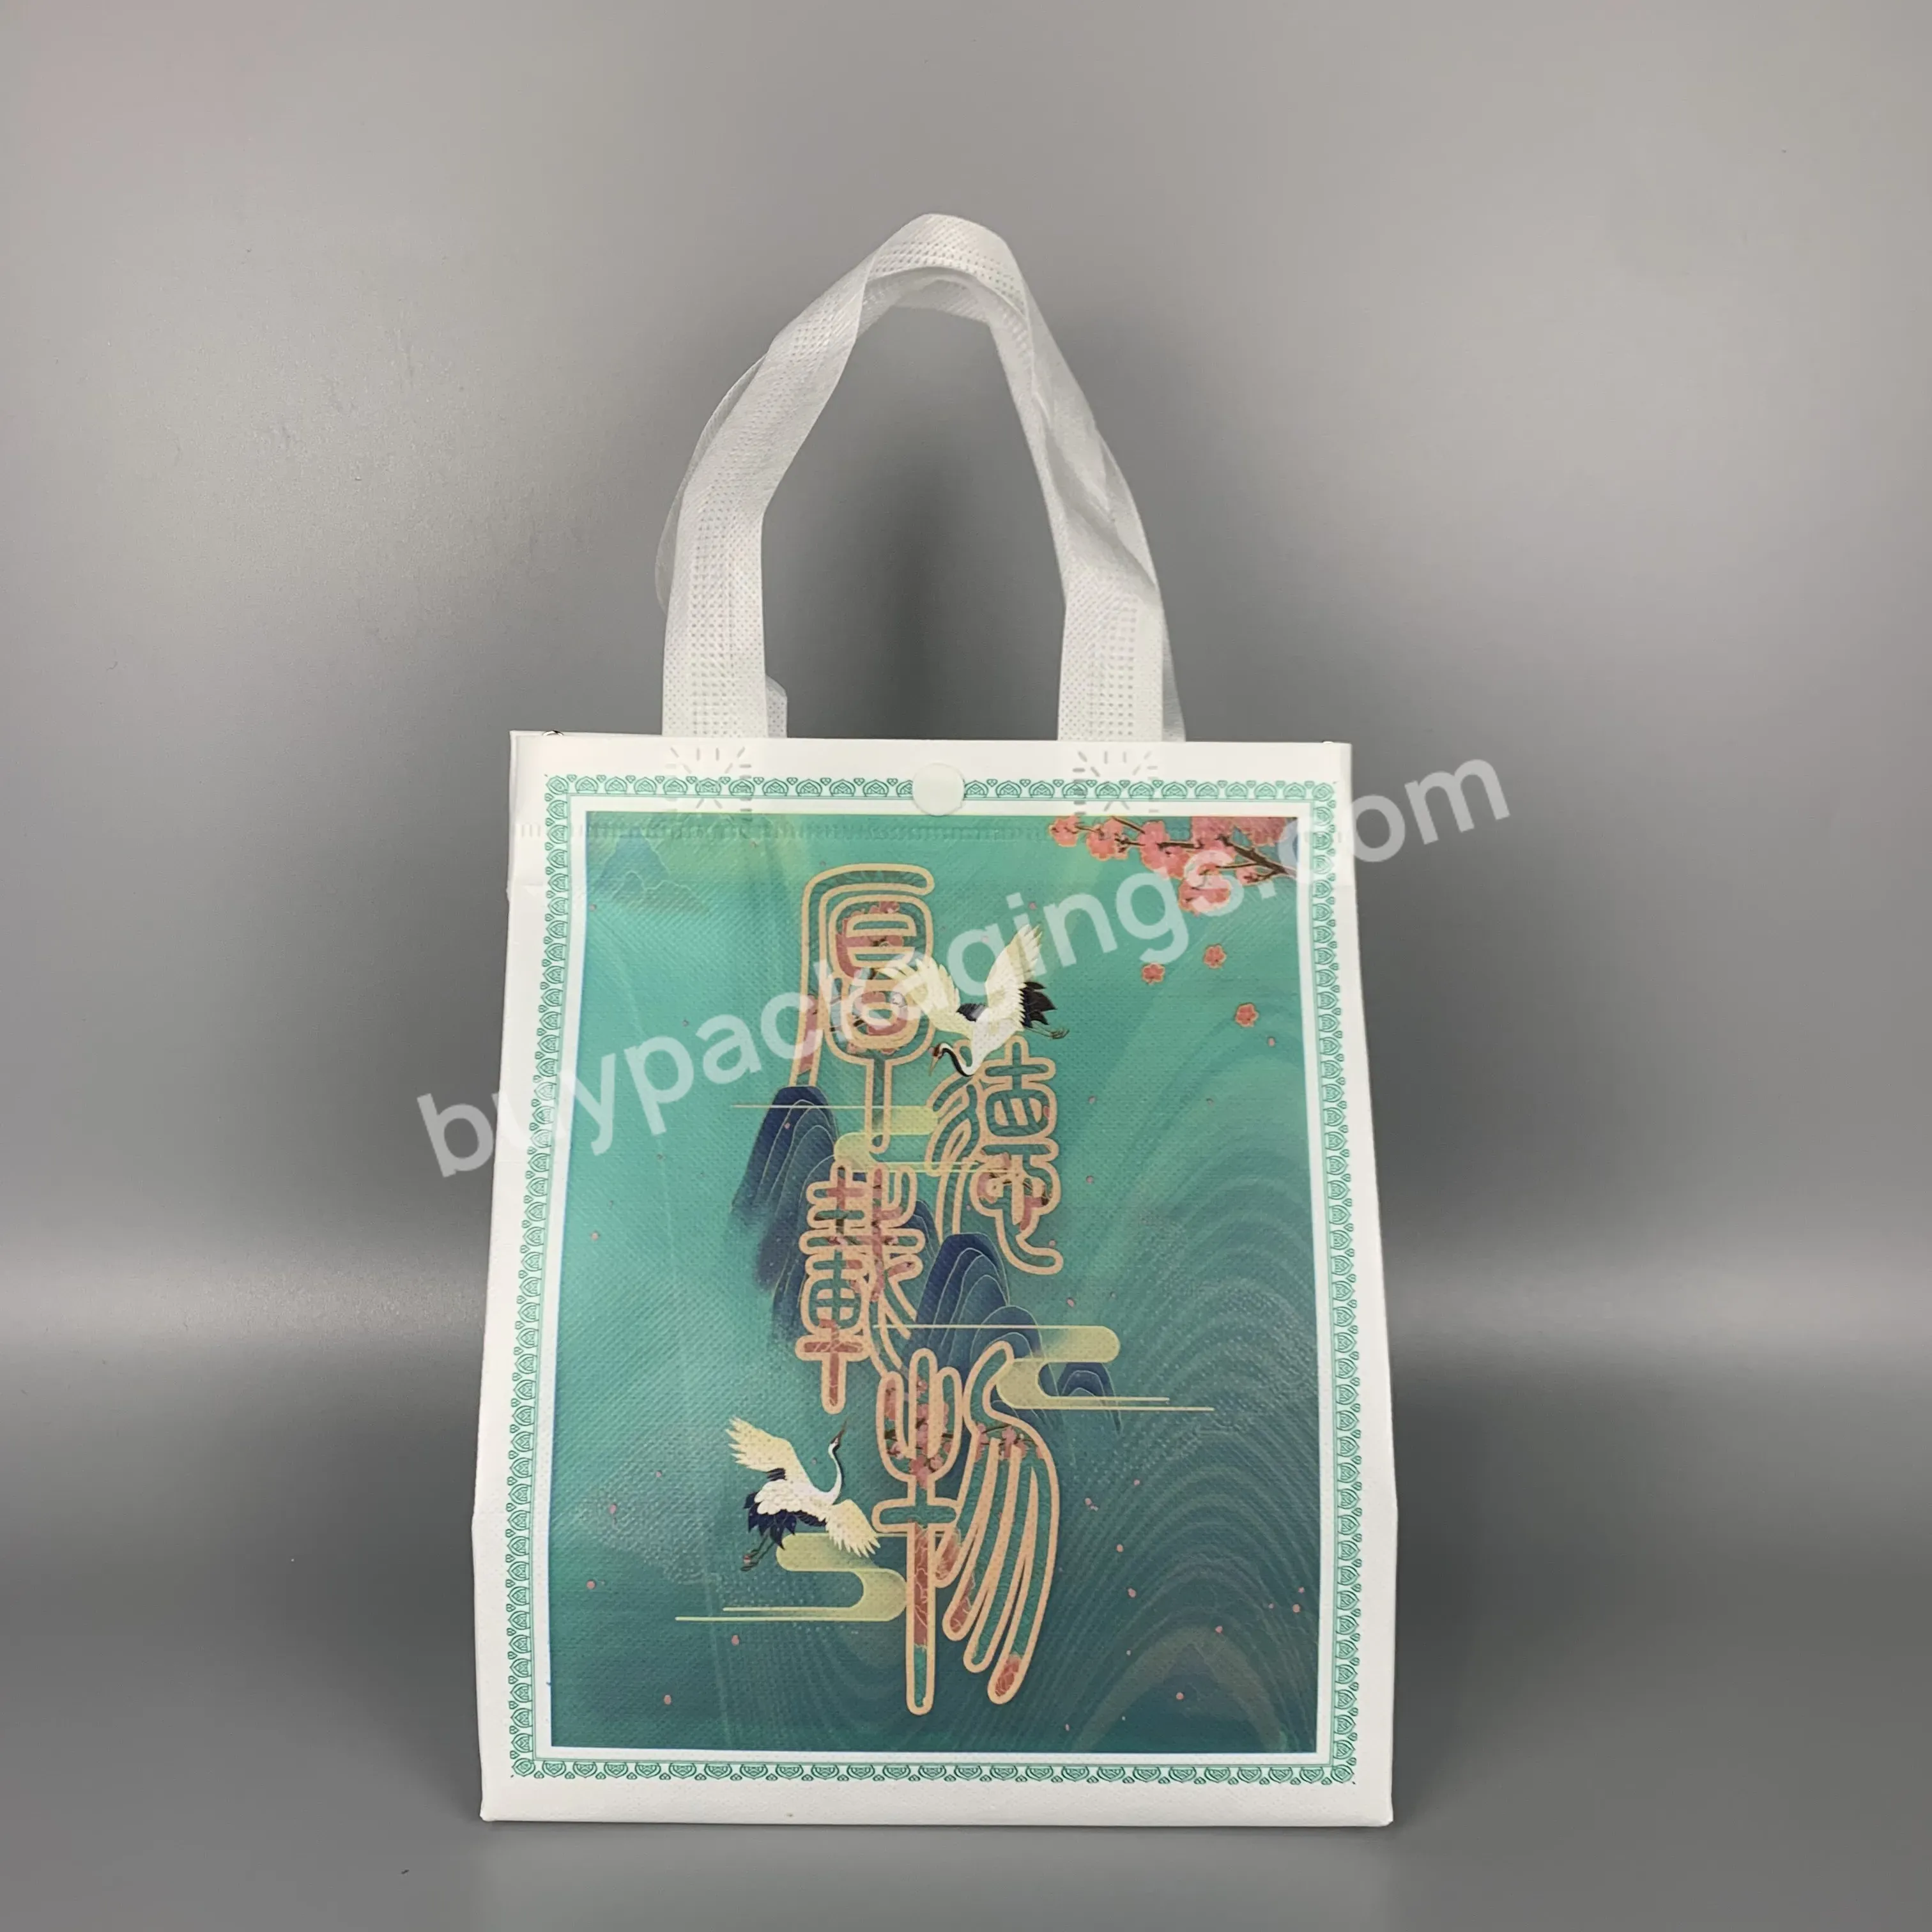 Promotional Durable Reusable Customized Non Woven Bag With Handle Print Logo For Shopping - Buy Promotional Durable Non Woven Bag,Reusable Cusomized Non Woven Bag,Customized Shopping Bag With Handle.